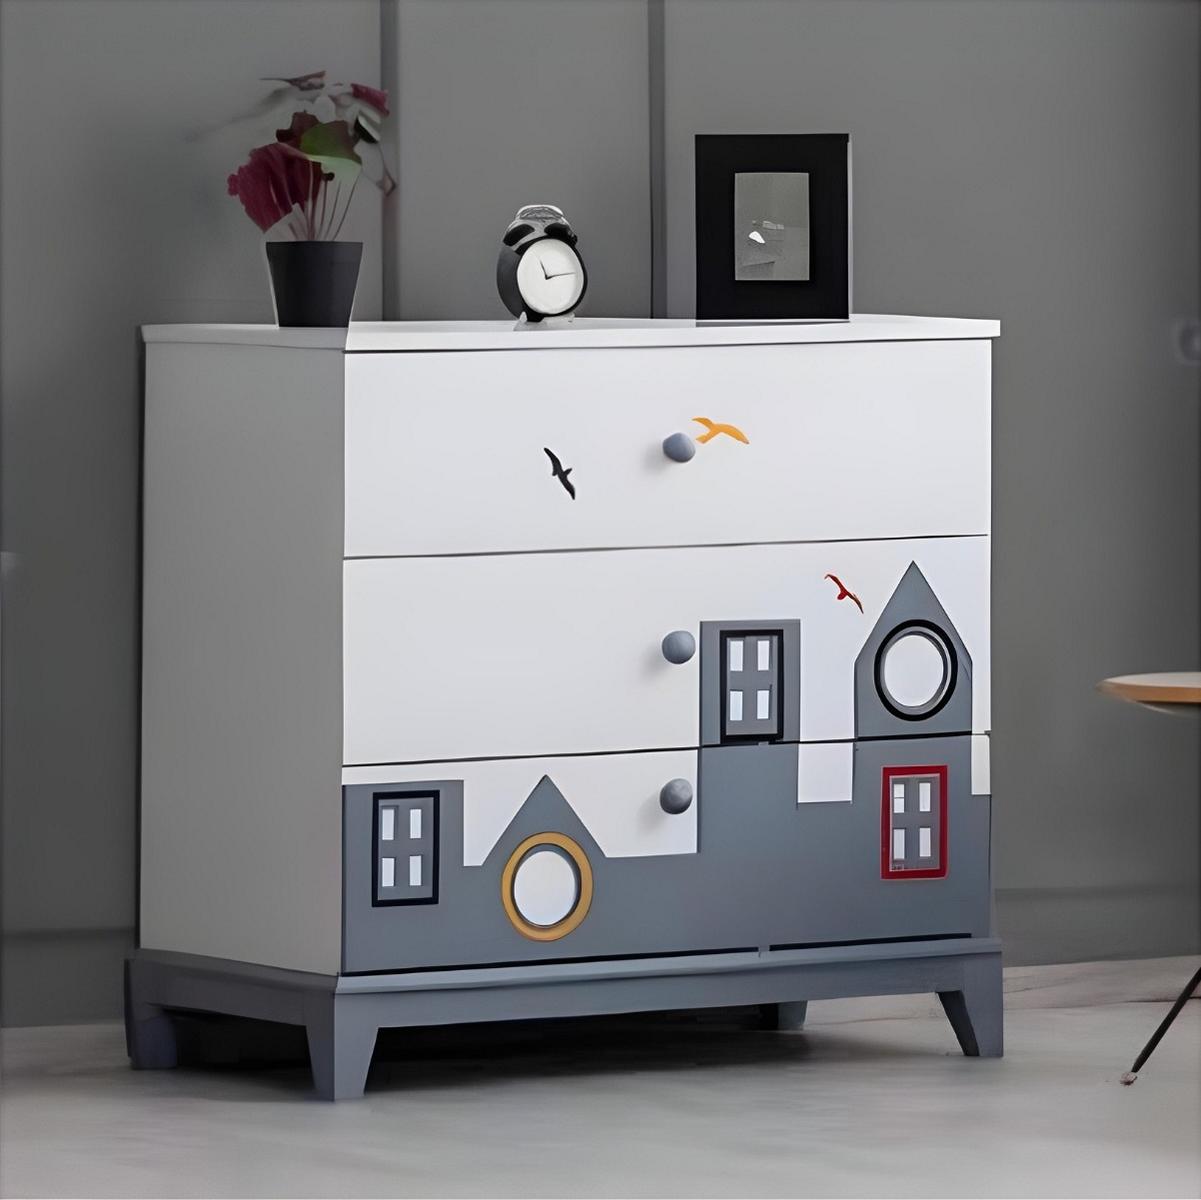 Modern chest of drawers Wooden furniture Bedroom New Furnishing